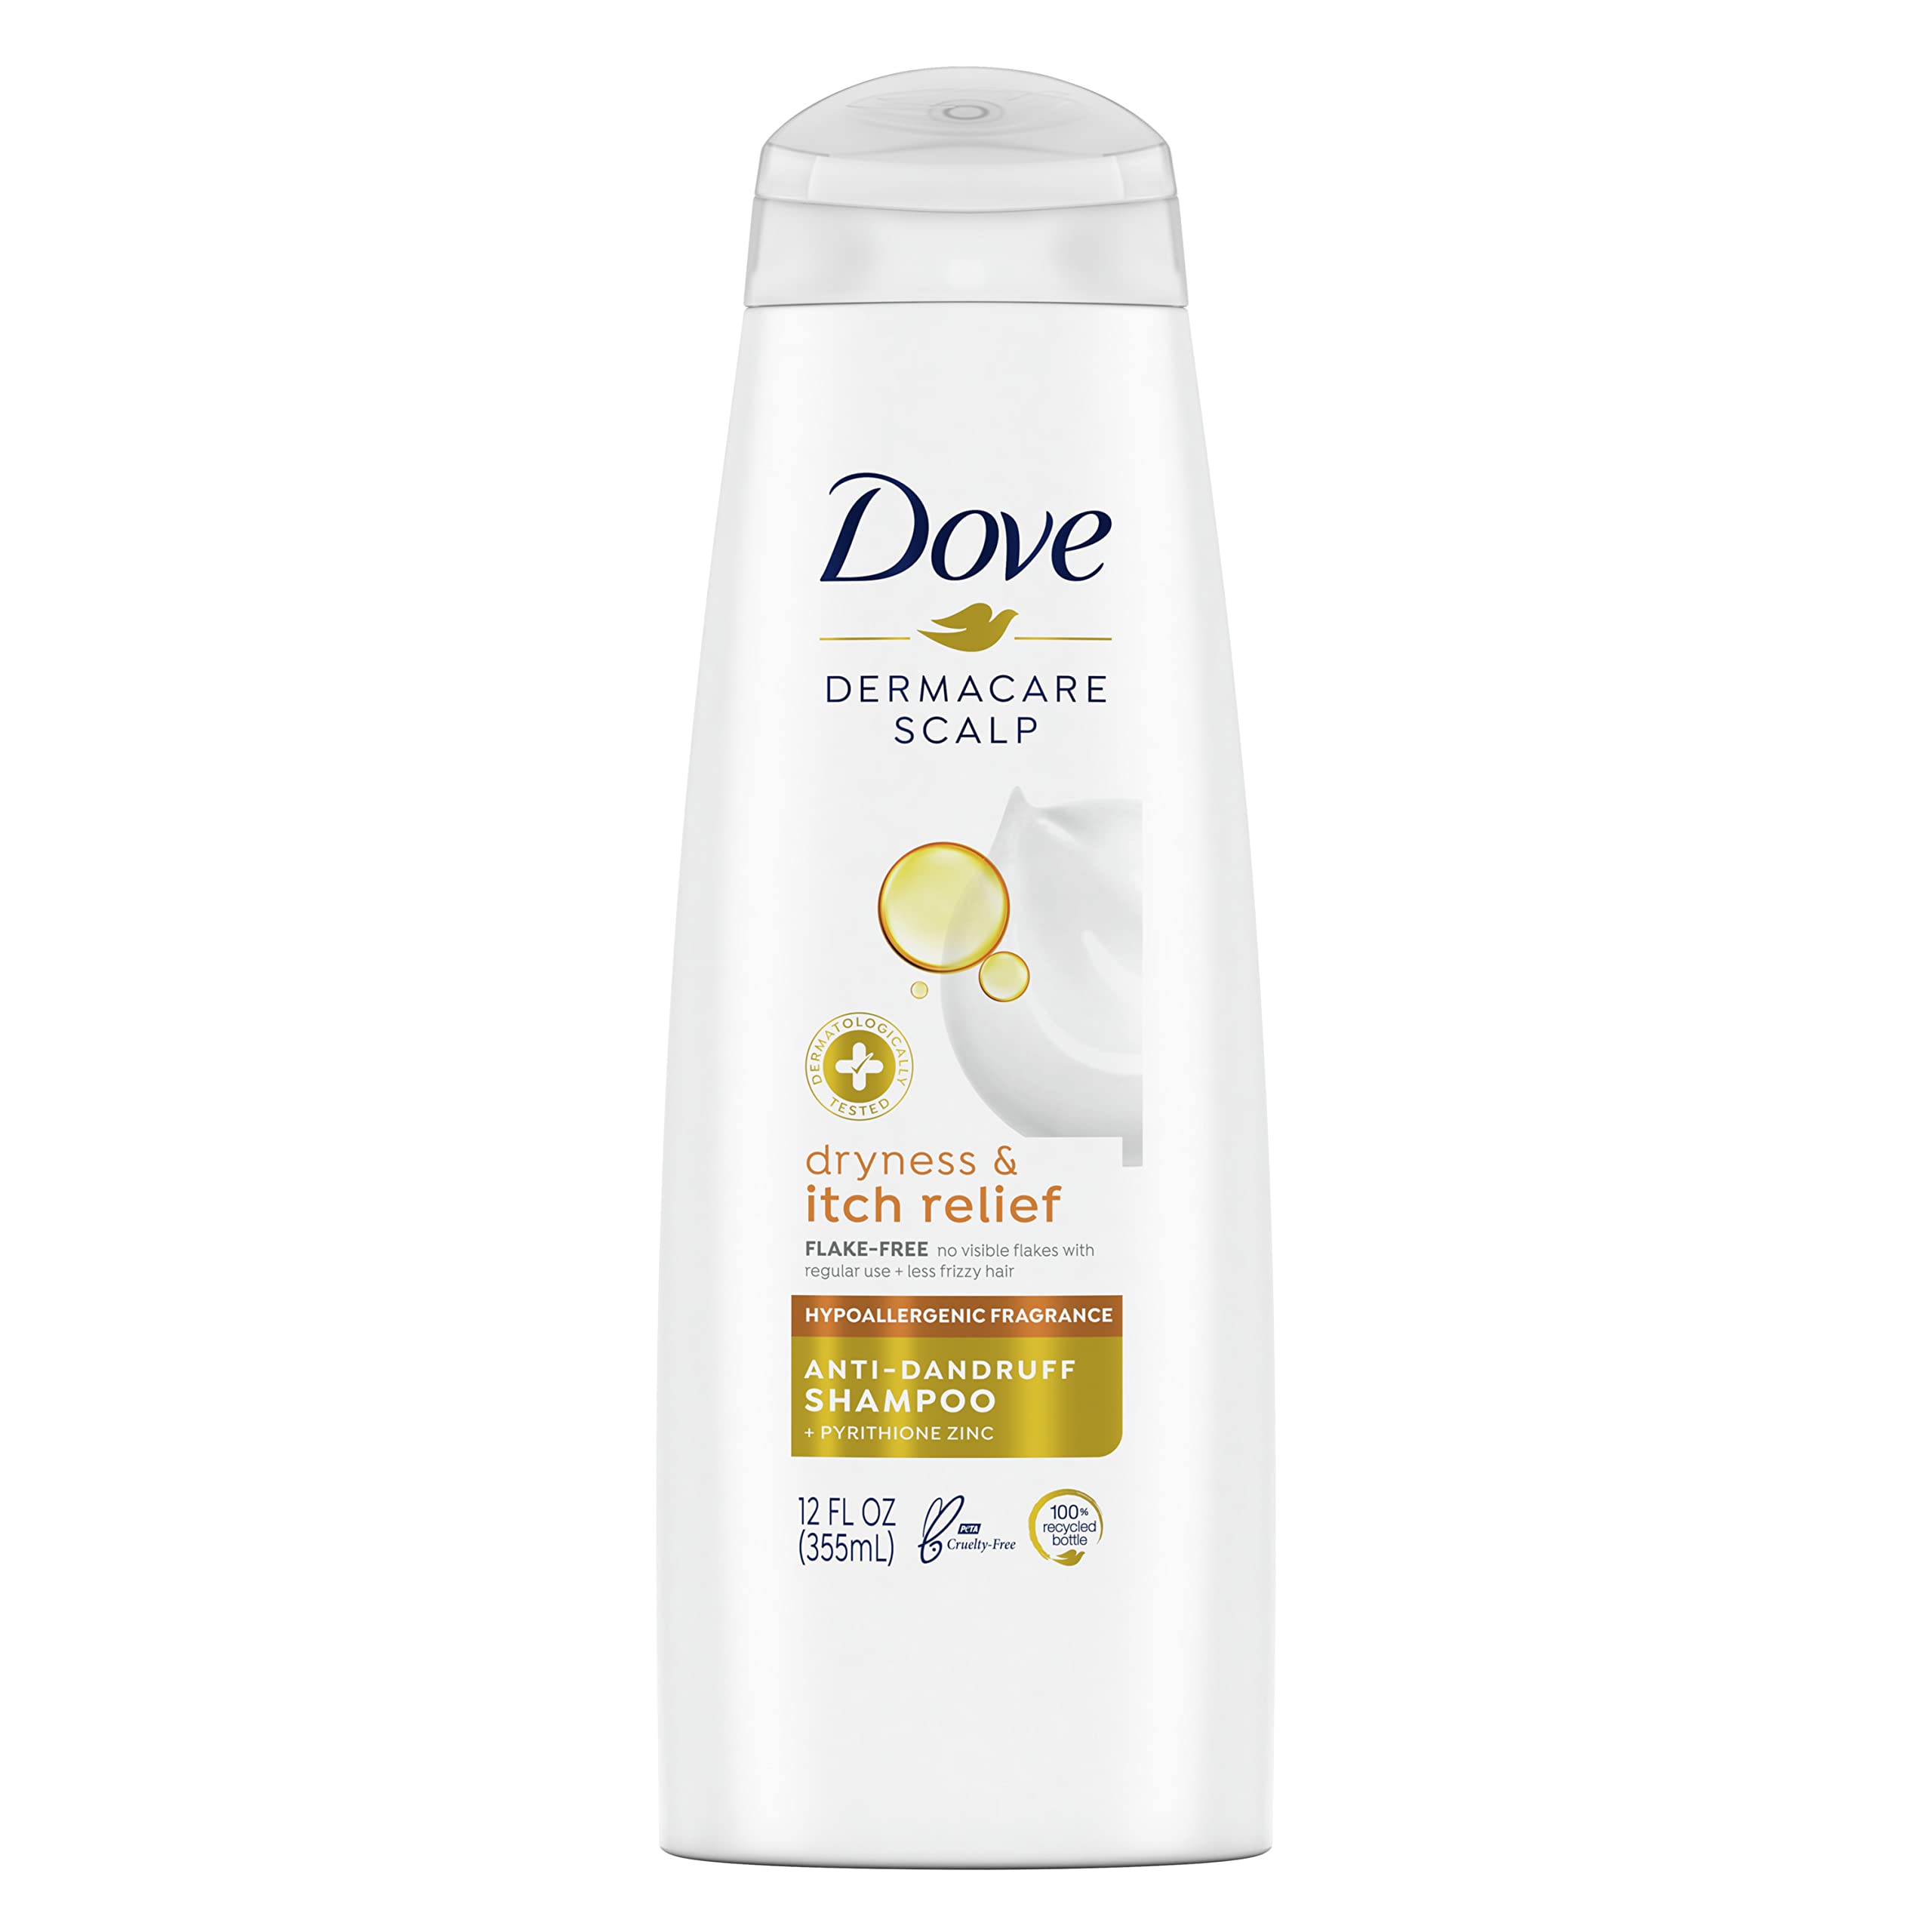 Dove DermaCare Scalp Anti Dandruff Shampoo for Dry and Itchy Scalp Dryness and Itch Relief Dry Scalp Treatment with Pyrithione Zinc 12 oz, 6 count